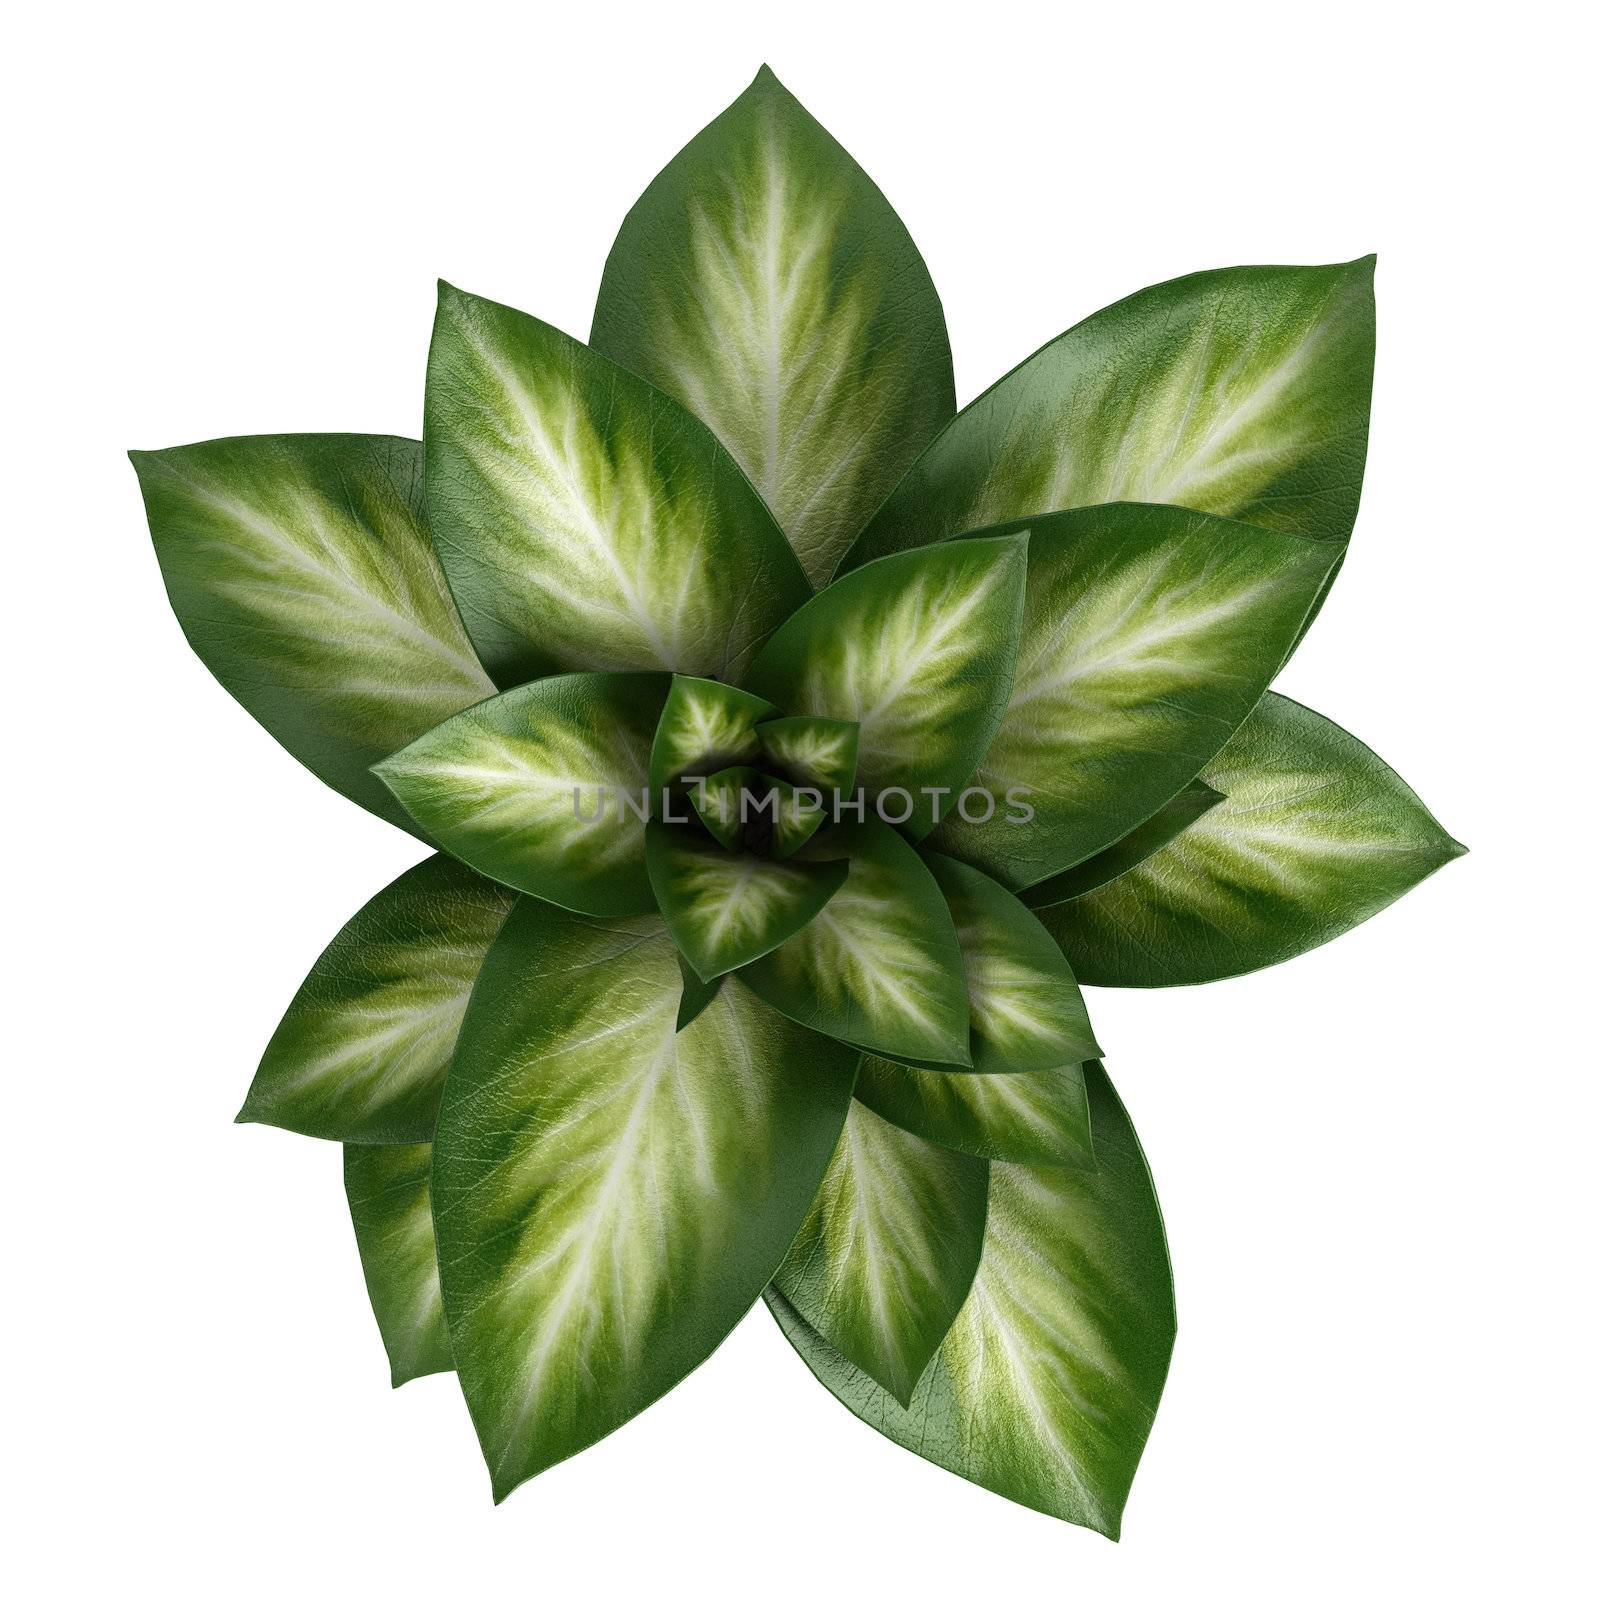 Variegated Dieffenbachia leaves in a tall cylindrical container isolated on white for use to decorate a home interior